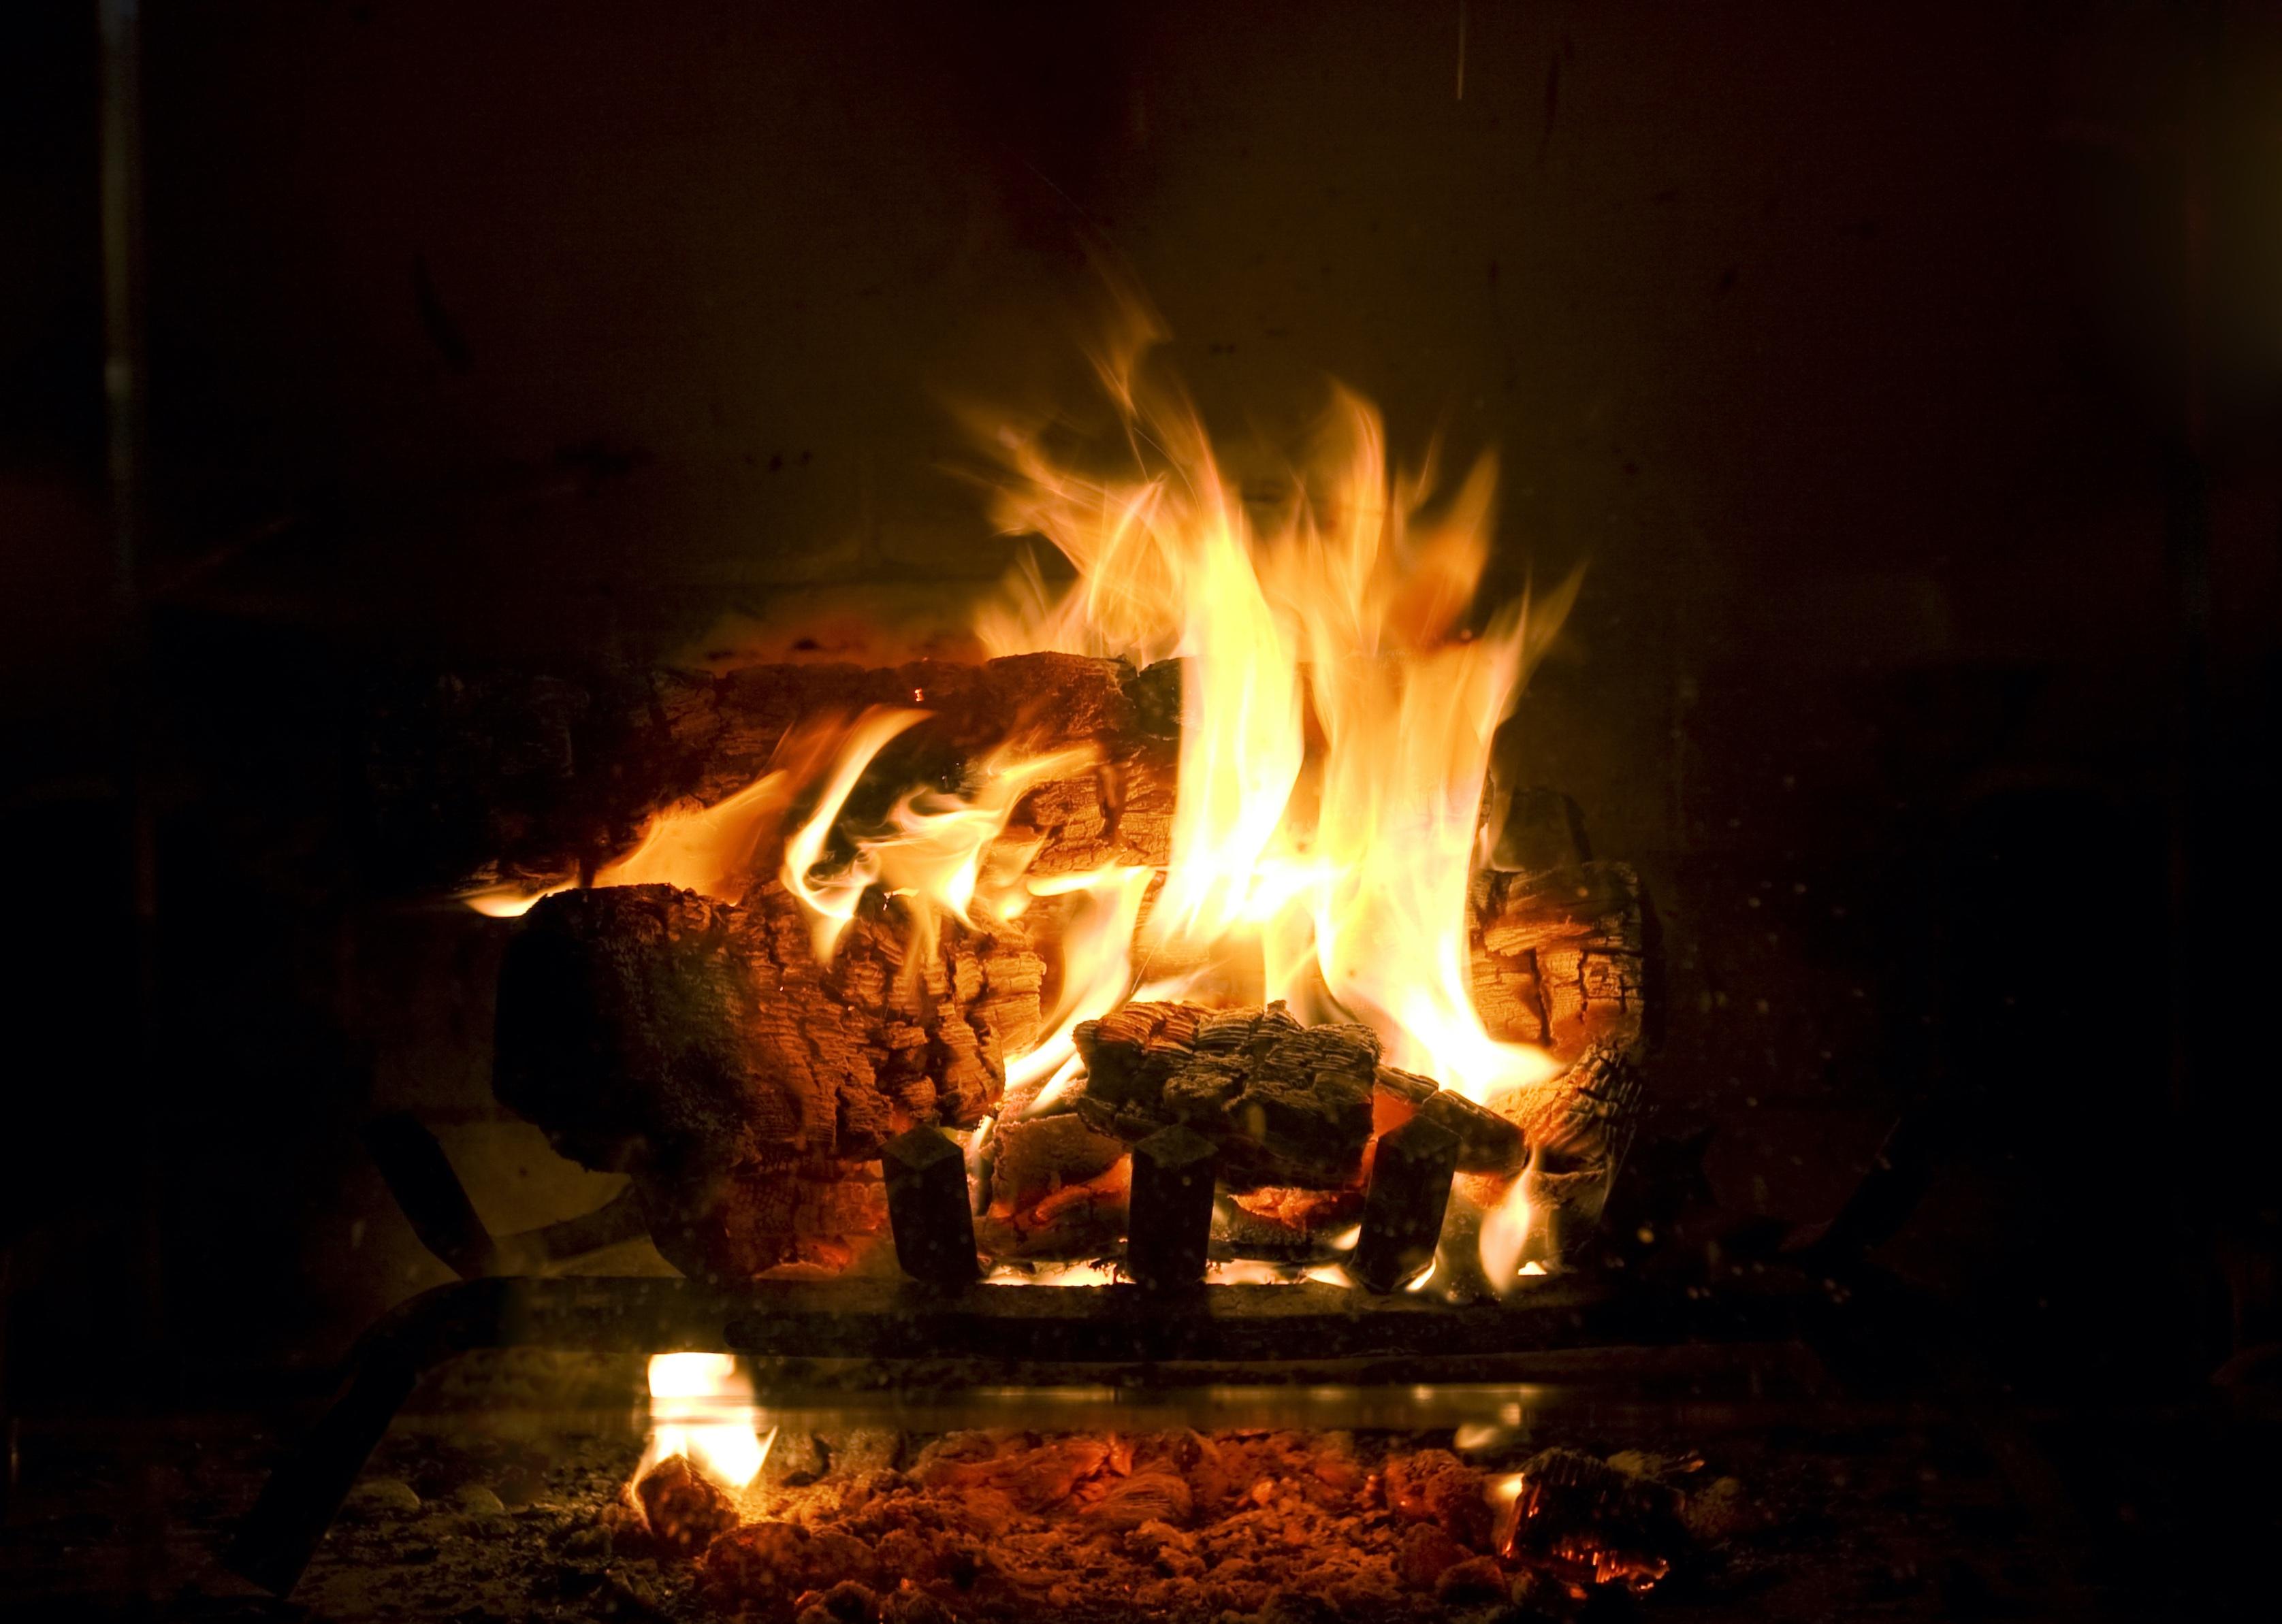 Wood-Burning Ban Issued for Christmas Day in Southern California